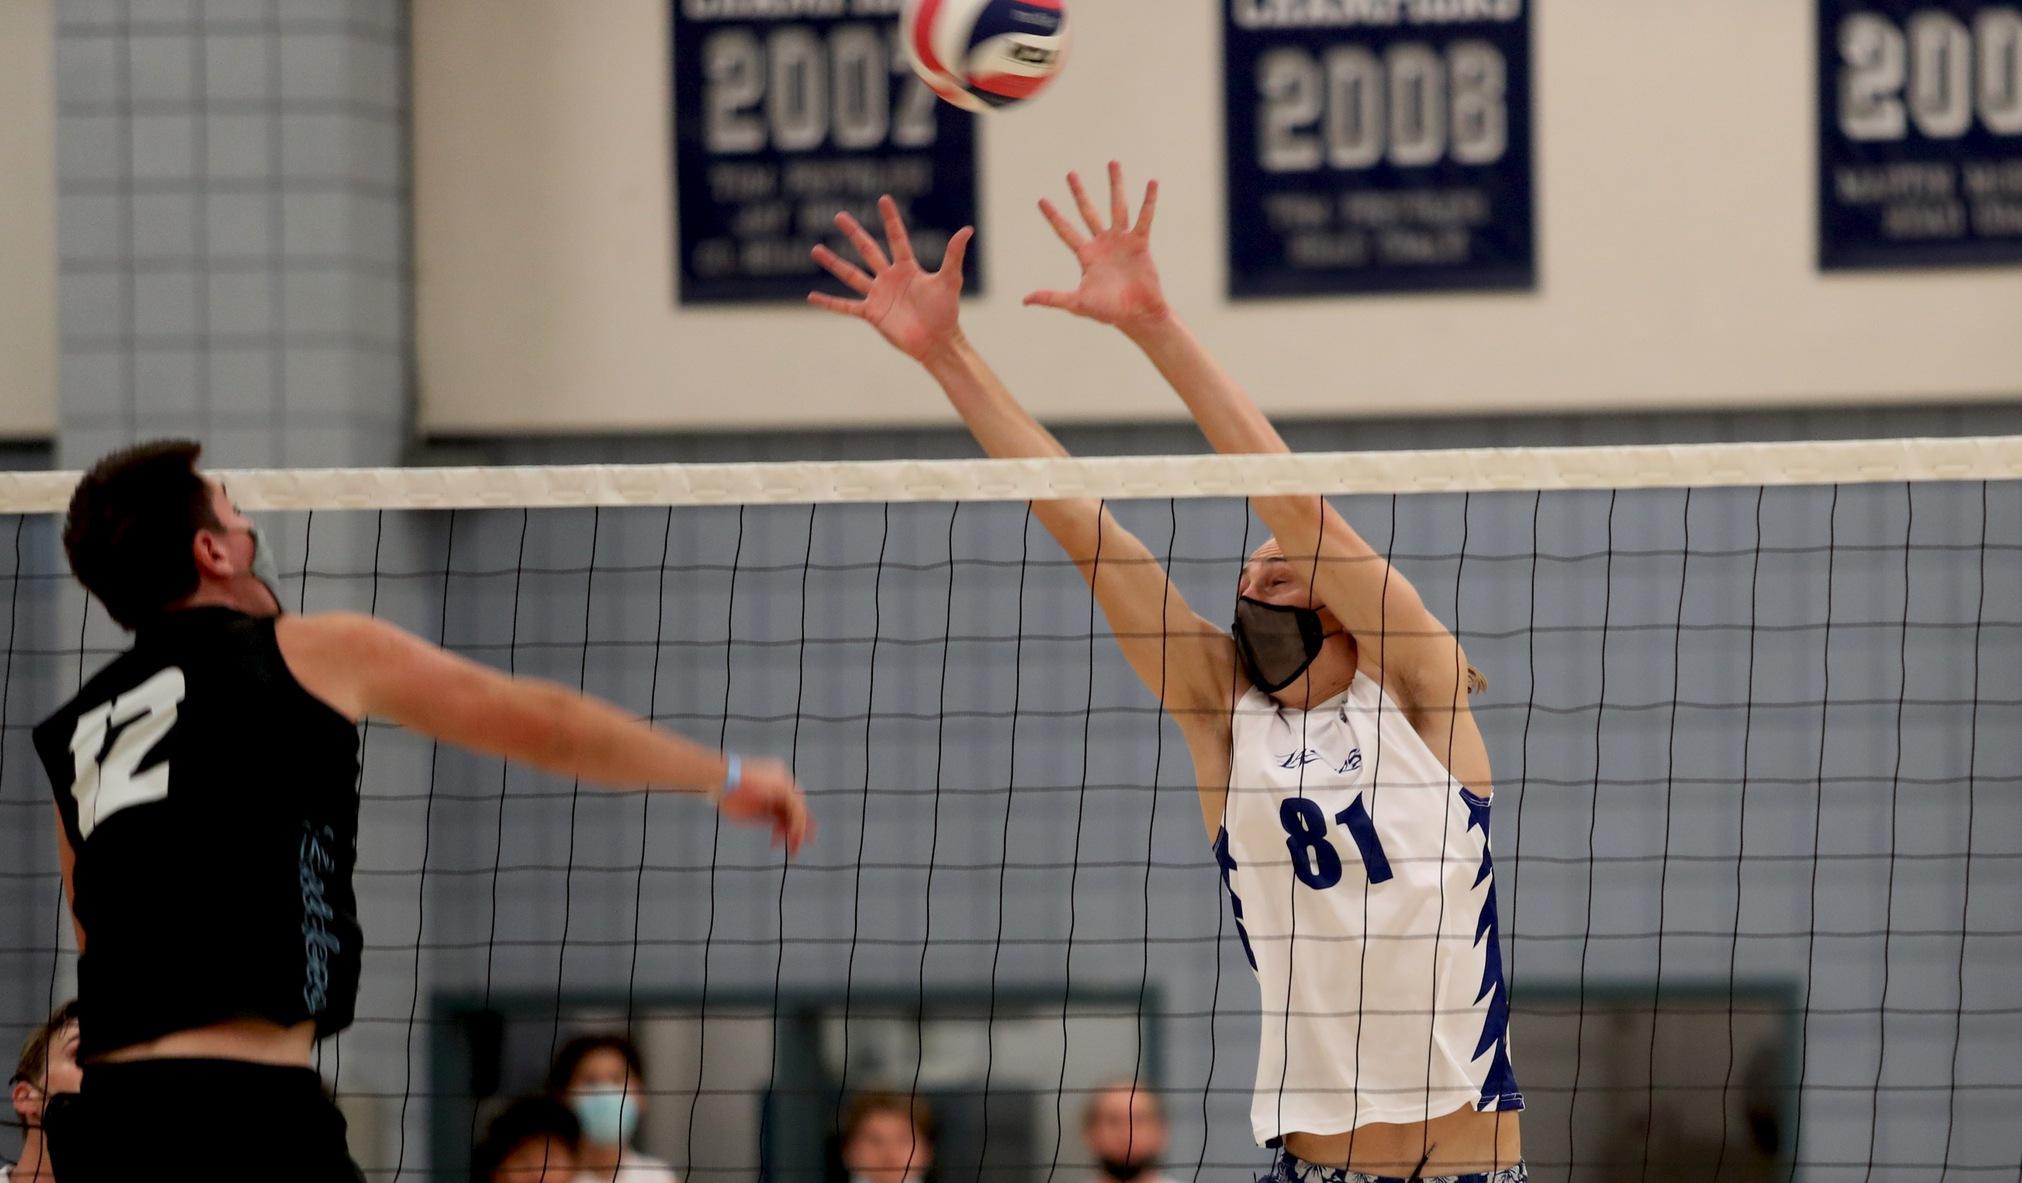 Men's volleyball team with big win to move up in standings